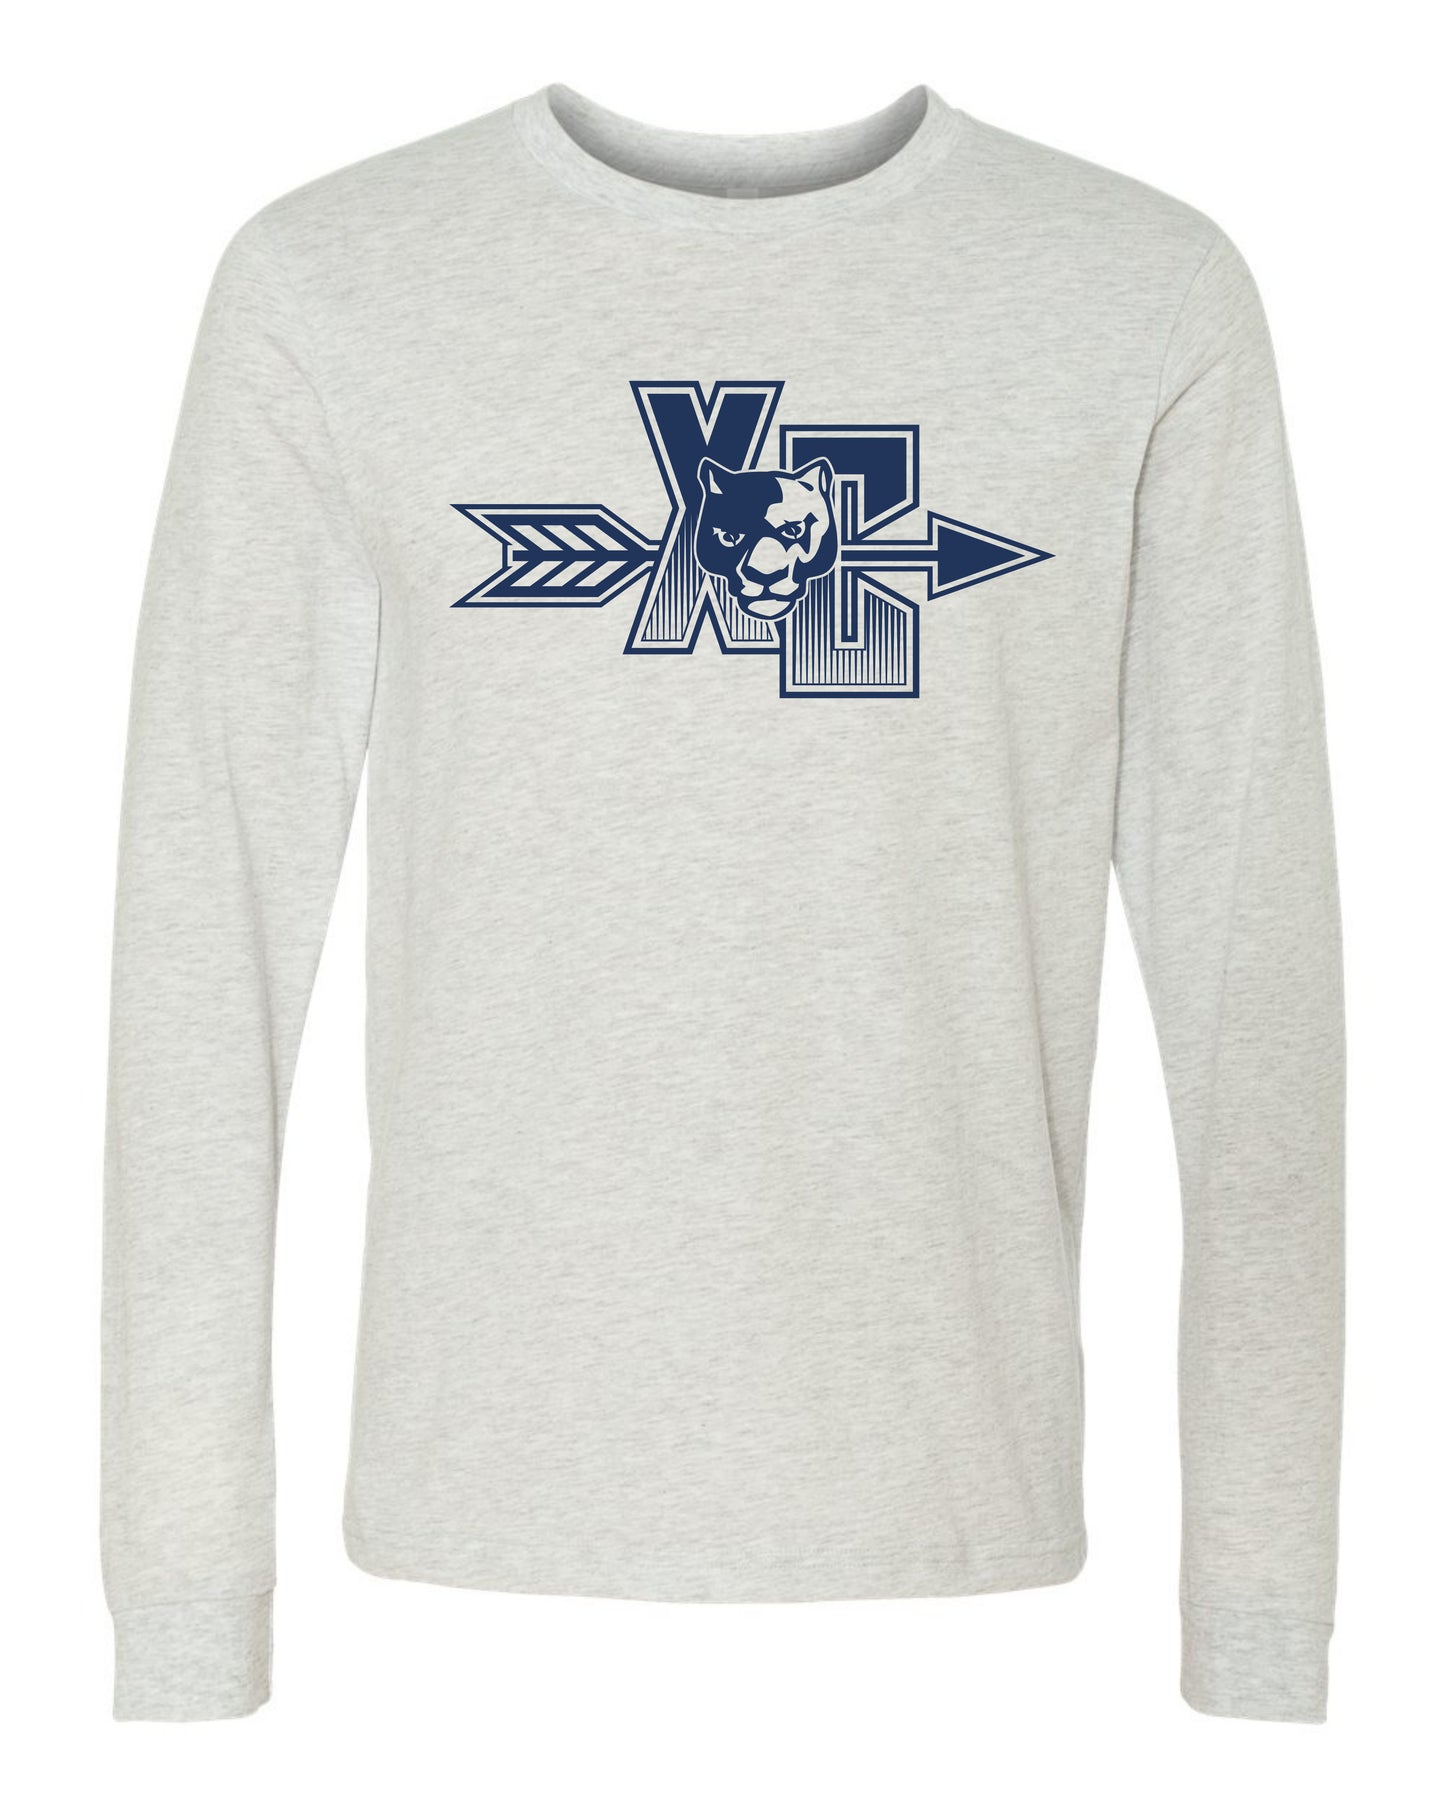 XC Panther Head - Adult Long Sleeve